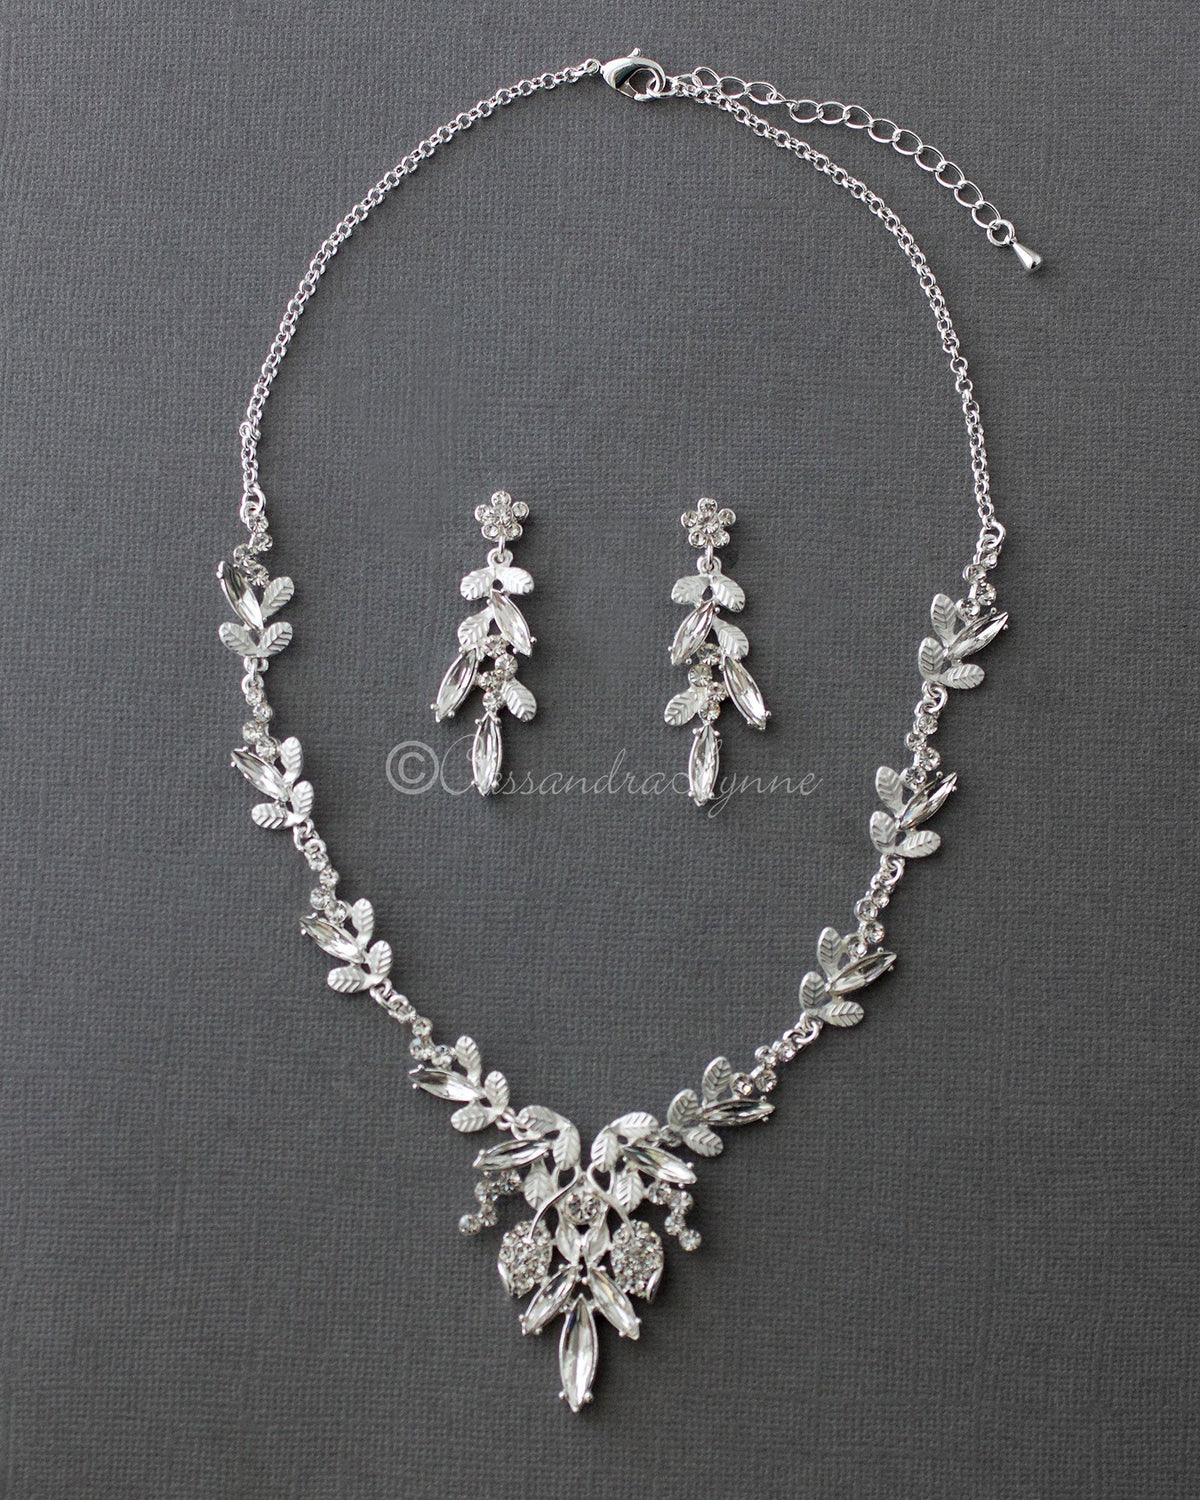 Bridal Necklace of Elongated Crystals - Cassandra Lynne